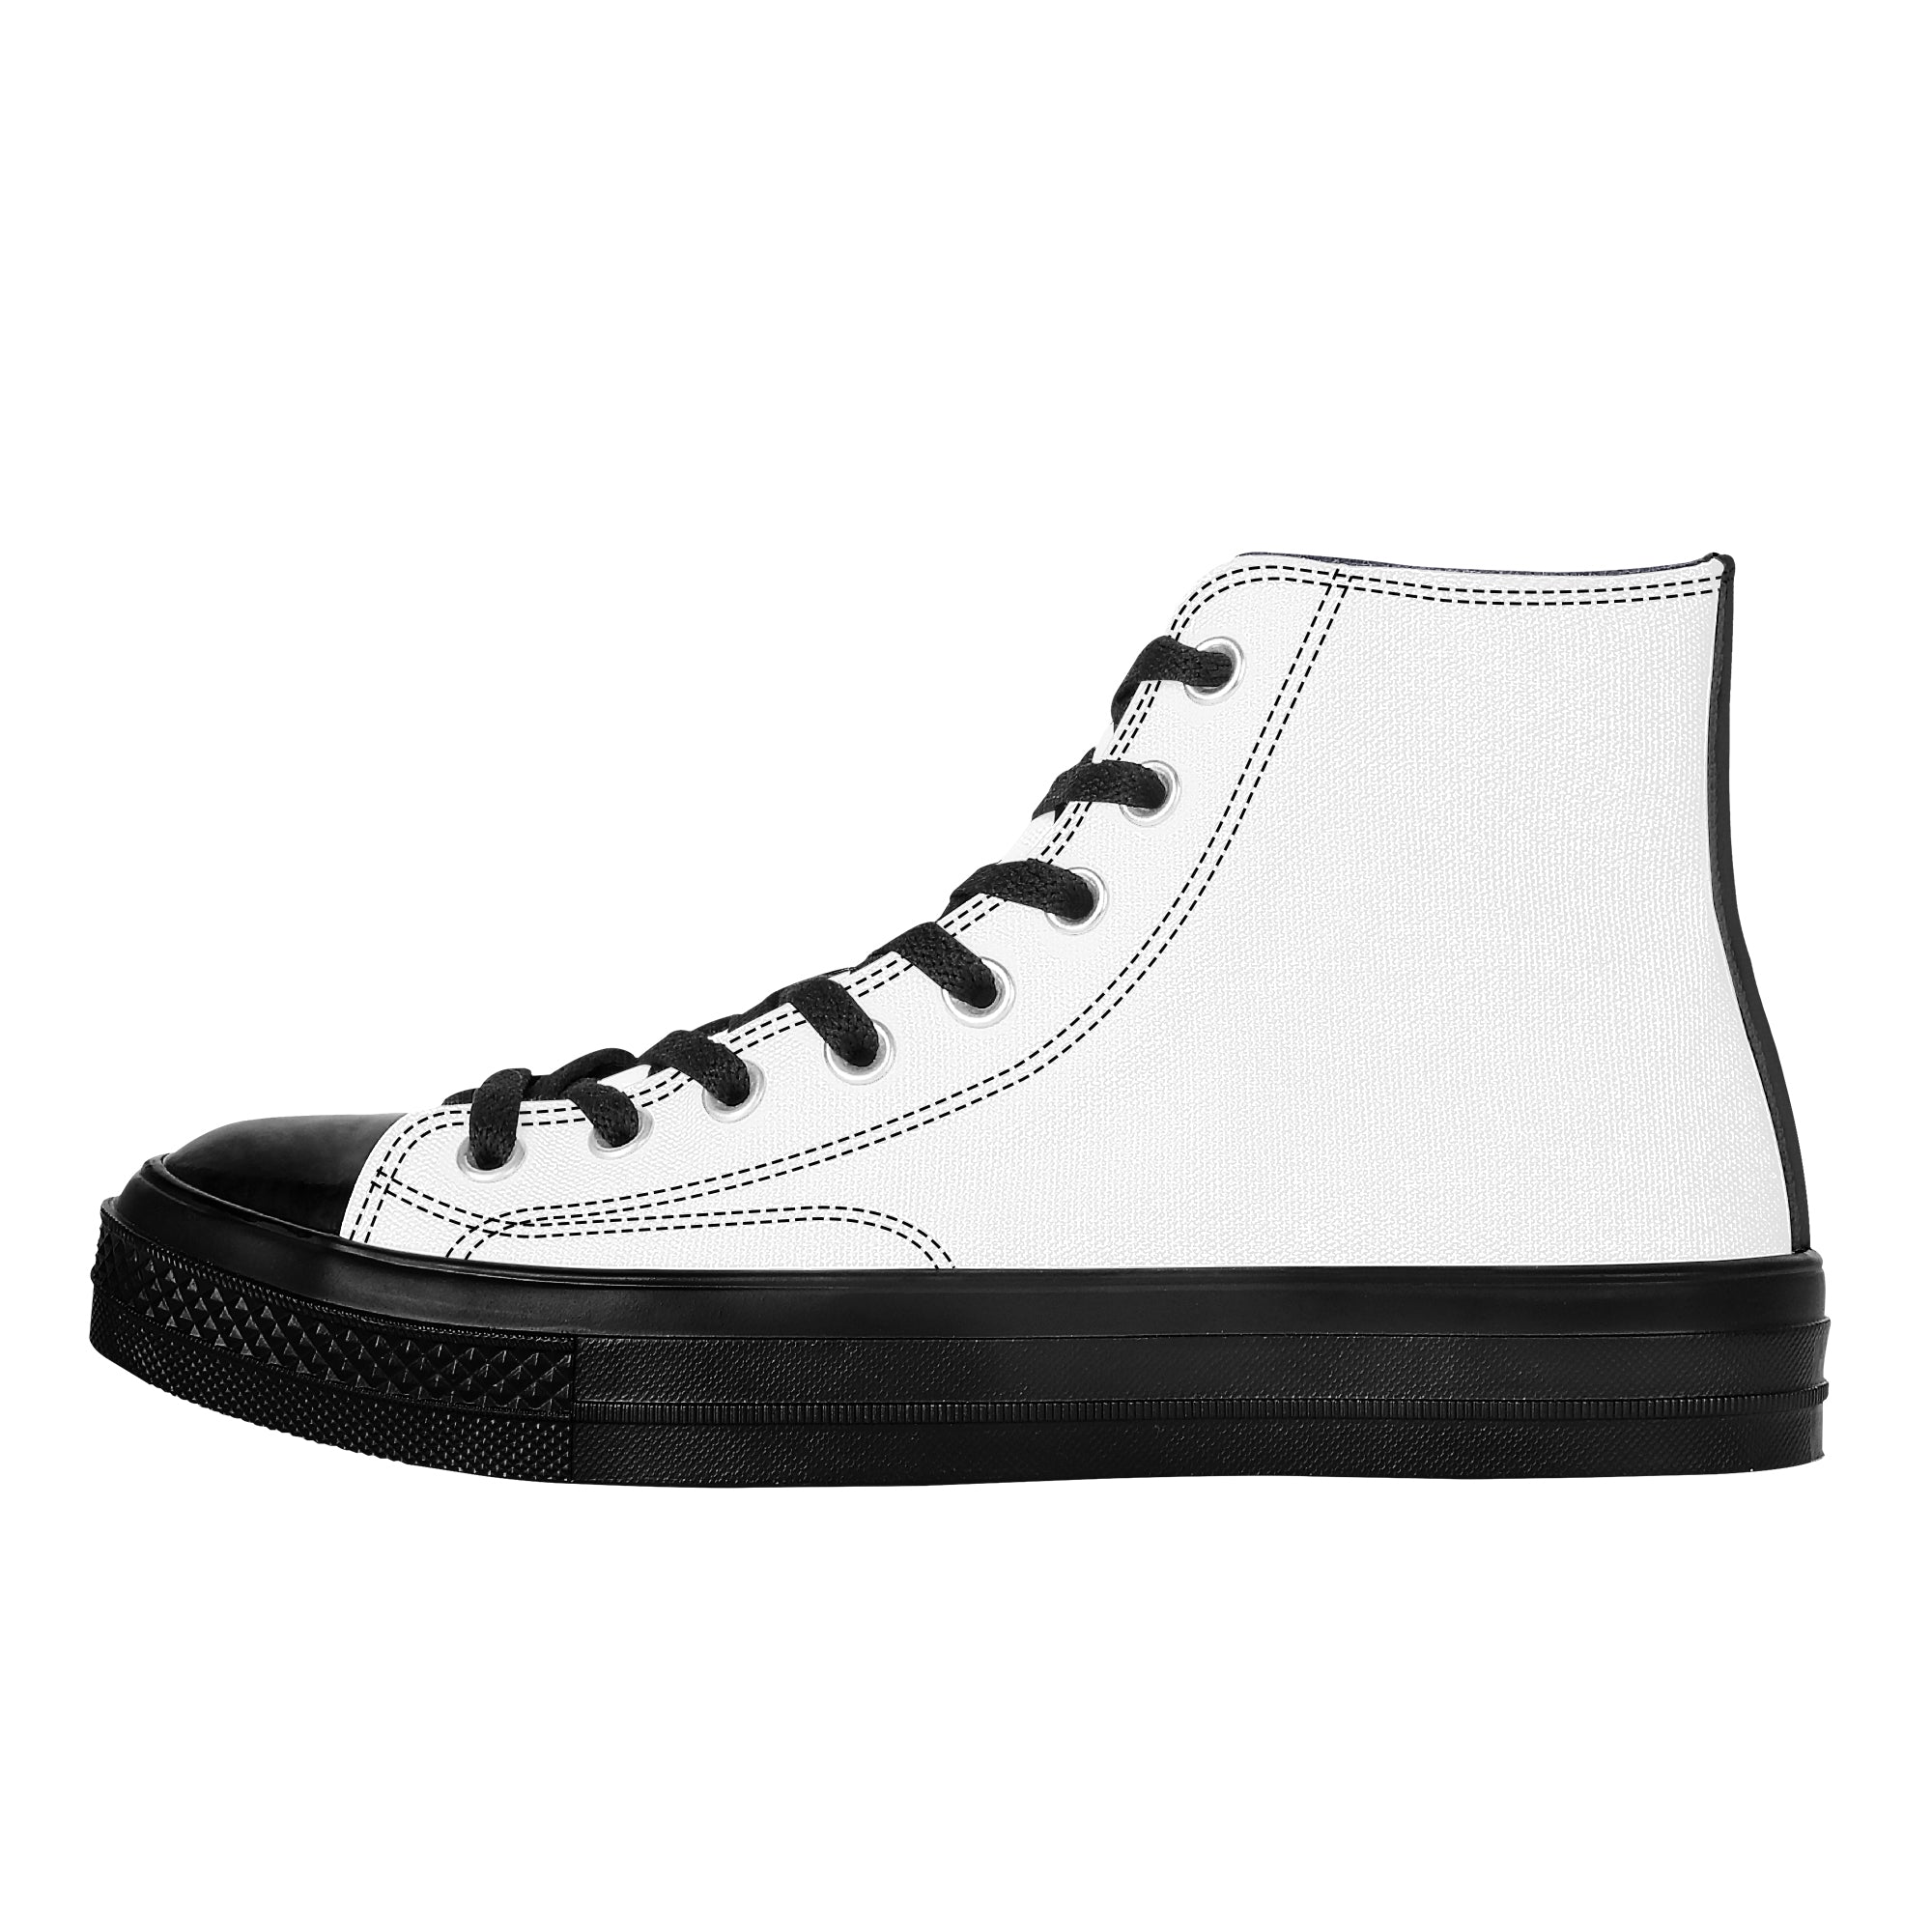 Customizable High Top Canvas Shoes - Design Custom Shoes with Black Sole - Shoe Zero